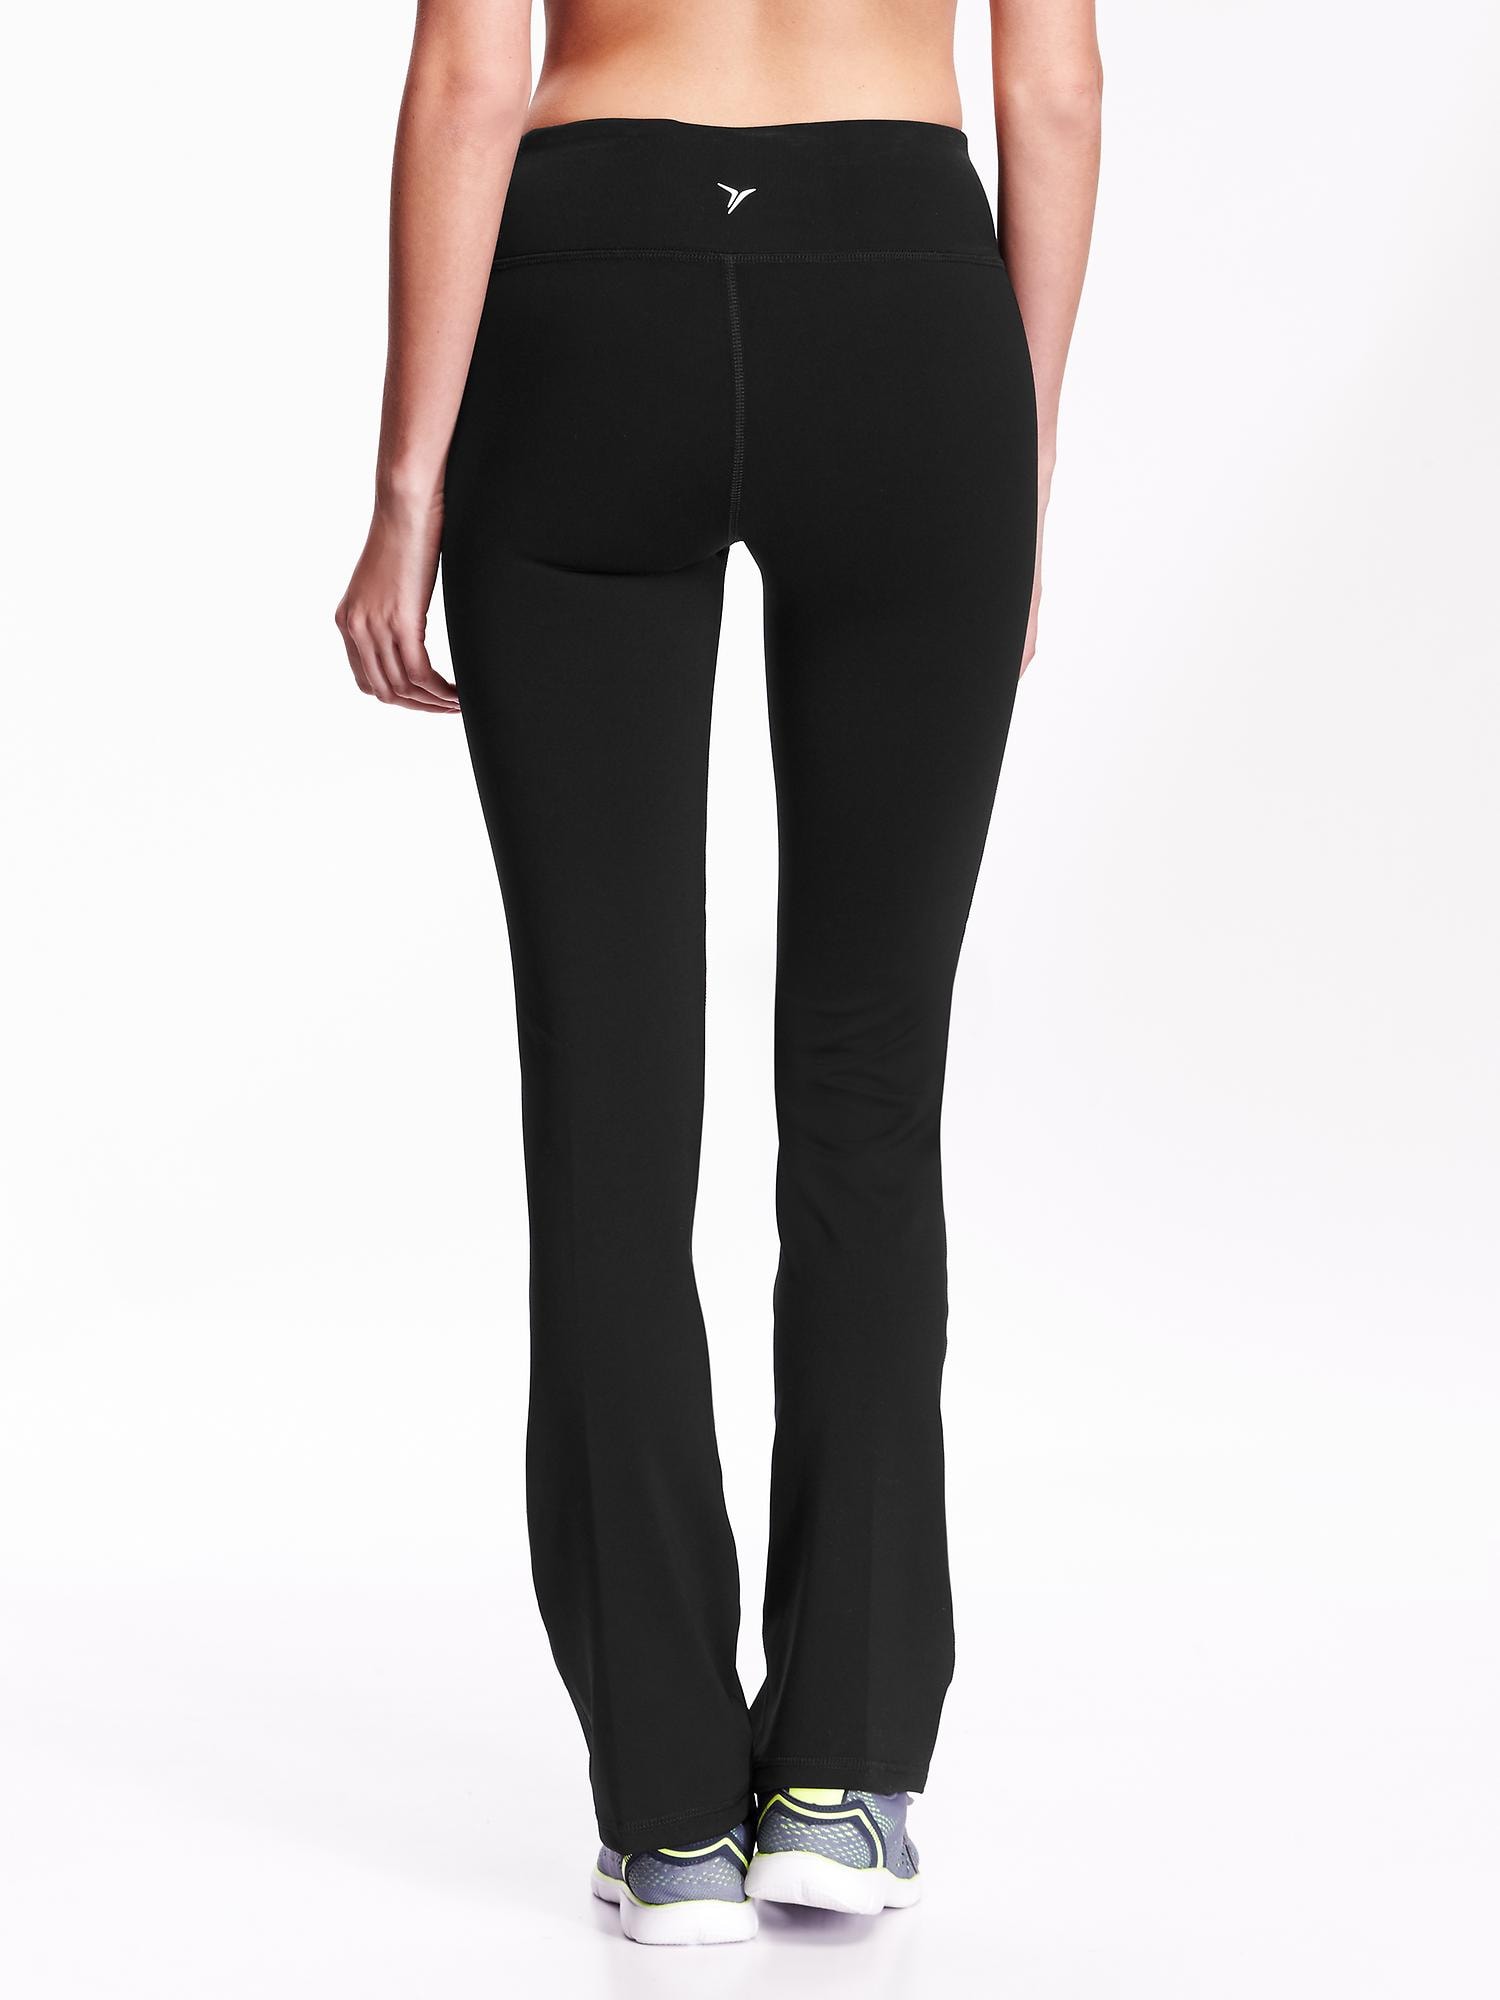 High-Rise Boot-Cut Compression Pants for Women